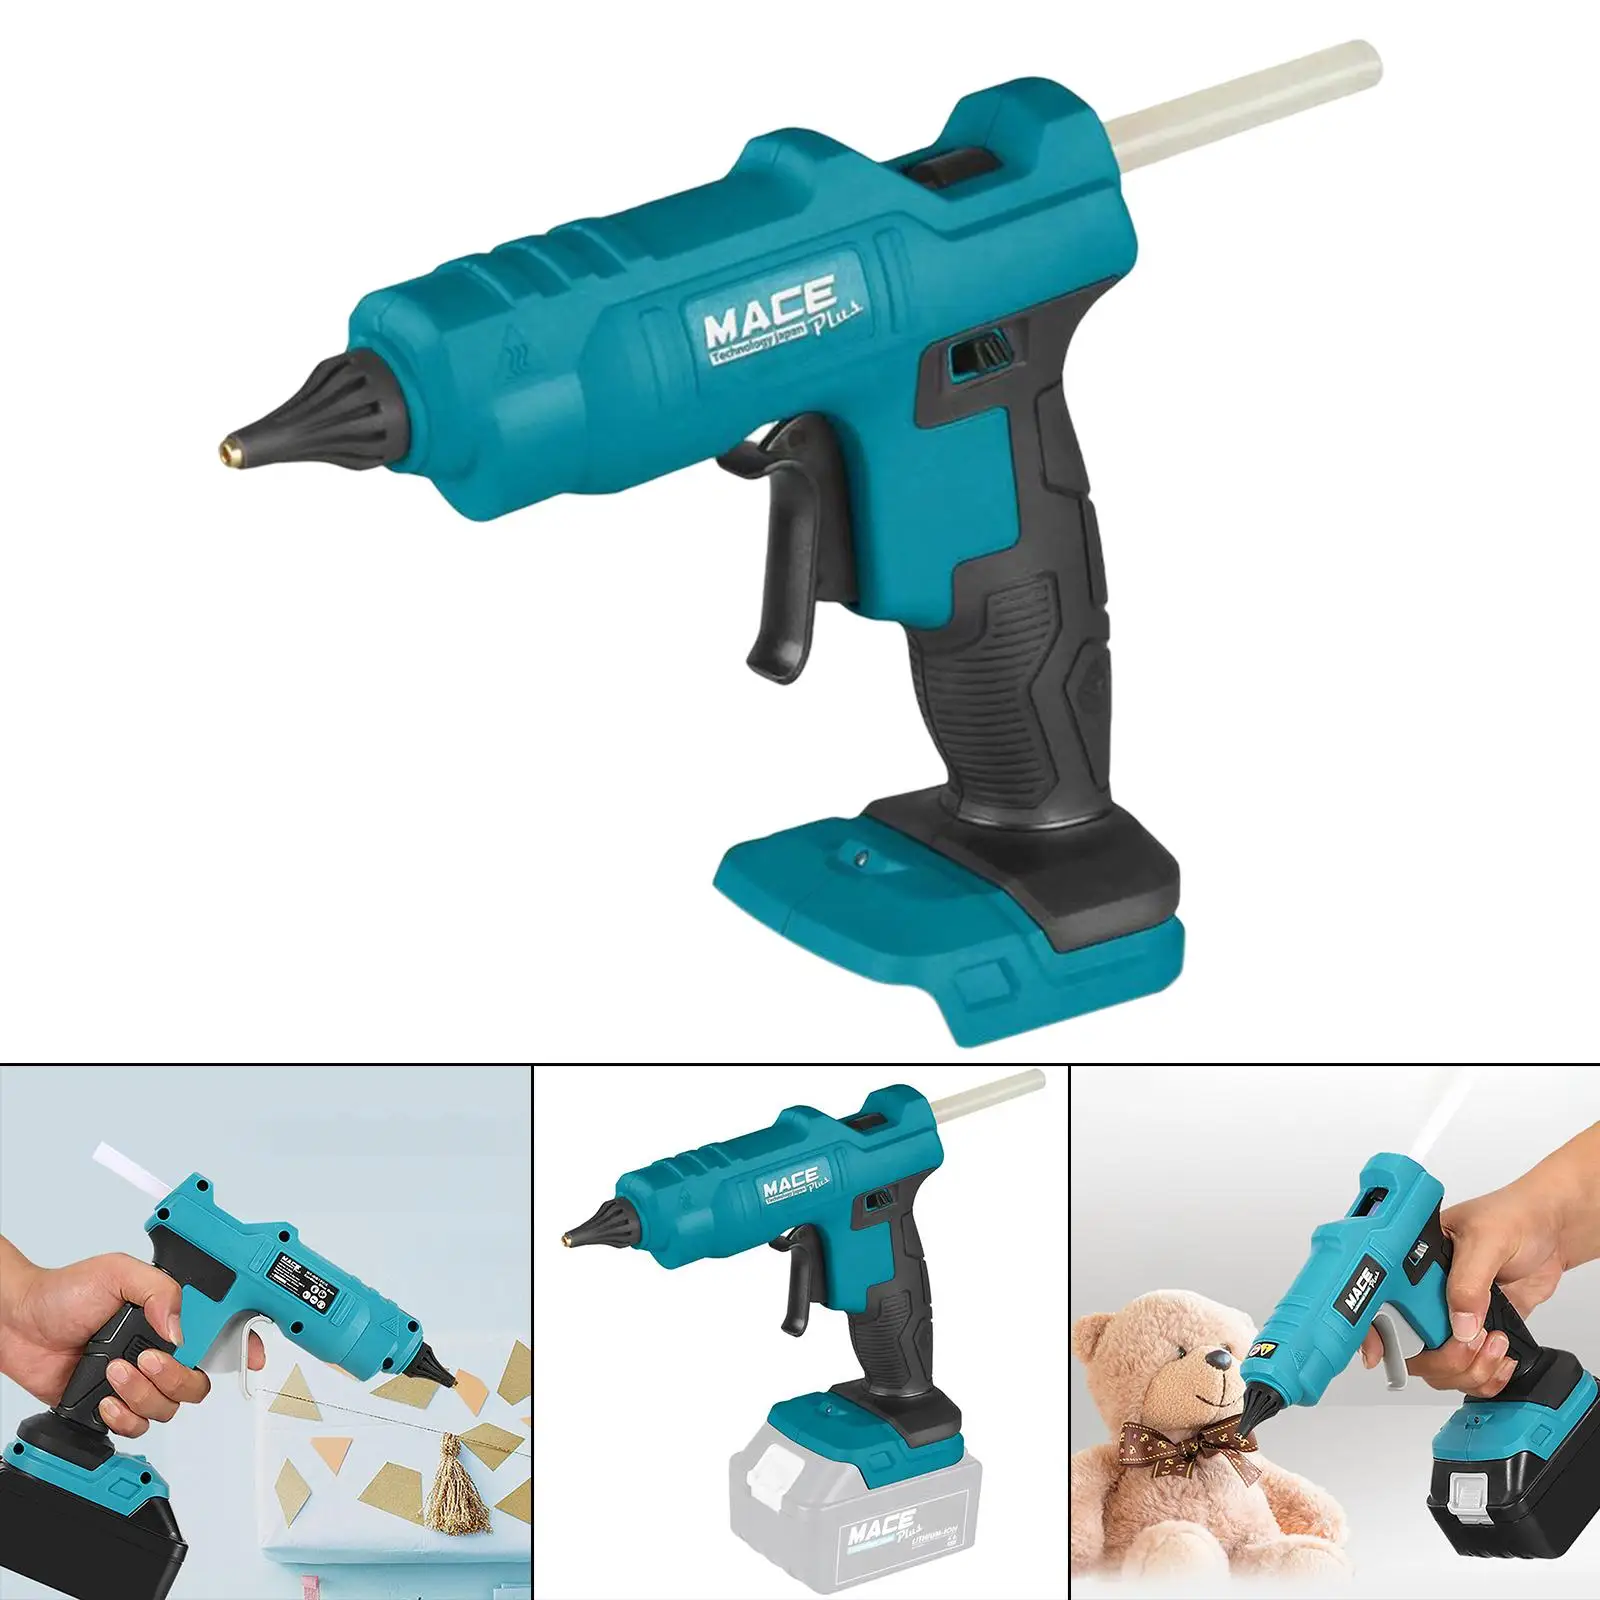 Cordless Hot Melt Glue Pistol with 10 Clear Glue Clubs Chargeable Electric Handheld Without Lithium Battery for Repairing Home